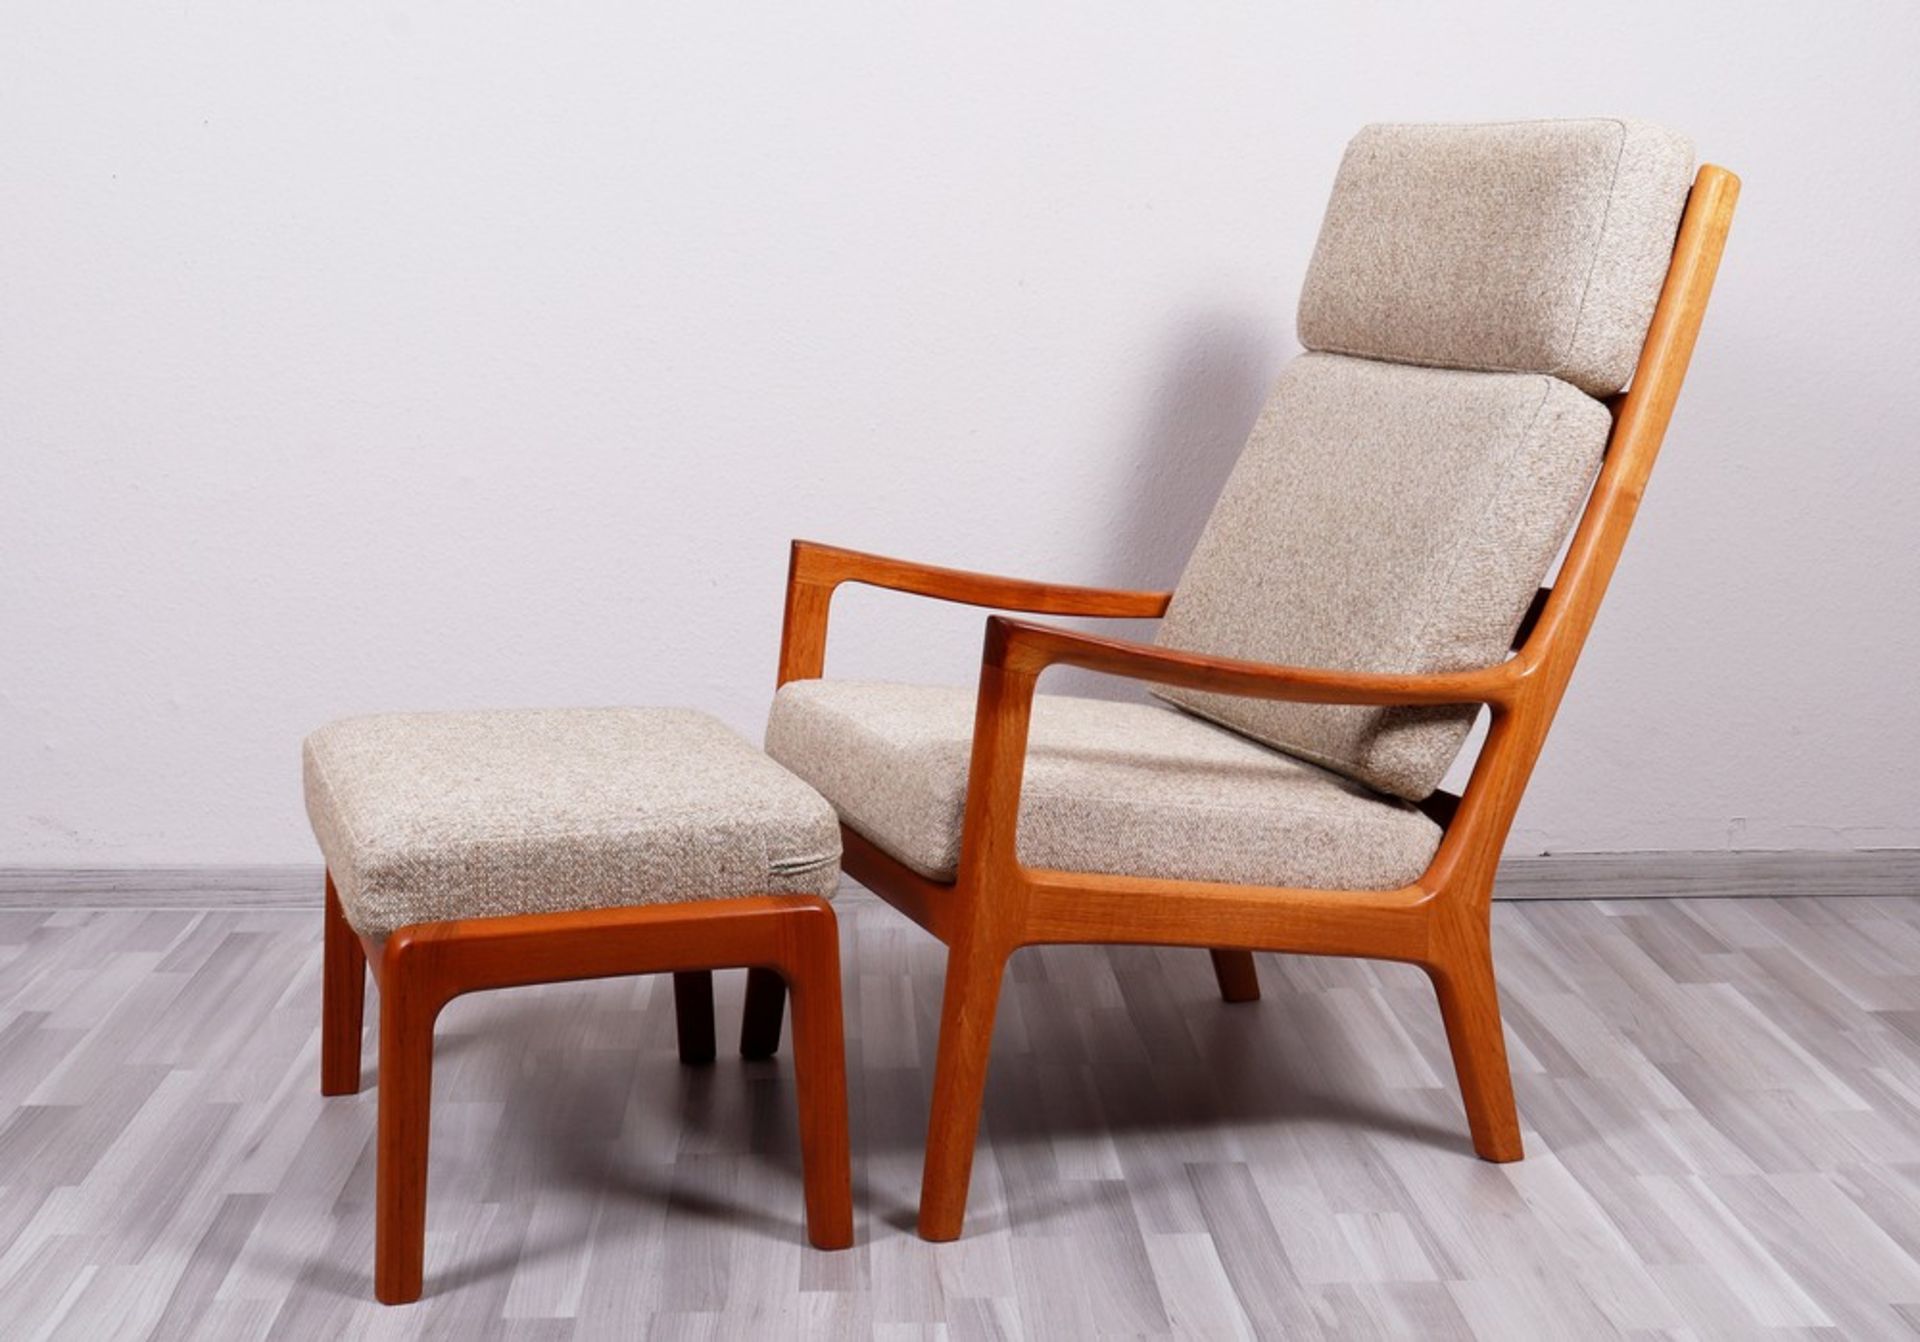 2 high-back armchairs with 1 ottoman, design Ole Wanscher for poul Jeppesen, Denmark, 1970s - Image 2 of 4